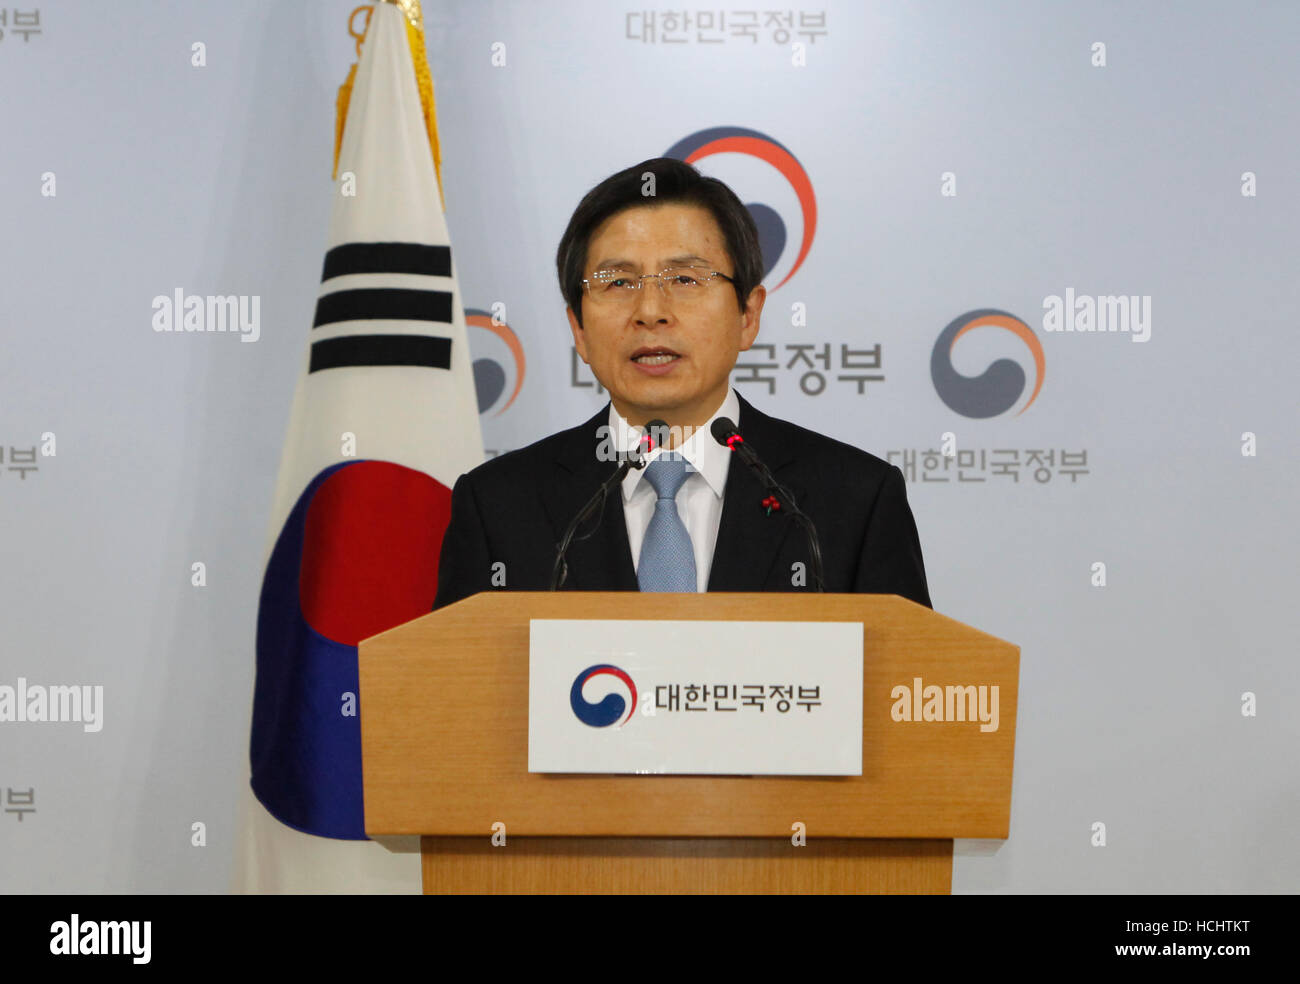 Seoul, South Korea. 9th Dec, 2016. South Korean Prime Minister Hwang Kyo-ahn gives a speech in Seoul, South Korea, Dec. 9, 2016. Impeached South Korean President Park Geun-hye said that she is gravely accepting the parliamentary decision to remove her from office after her impeachment motion was passed through the National Assembly with an overwhelming support. Prime Minister Hwang Kyo-ahn will take over, becoming acting president while the trial gets under way for as long as 180 days to determine whether to permanently force Park out. Credit:  Yao Qilin/Xinhua/Alamy Live News Stock Photo